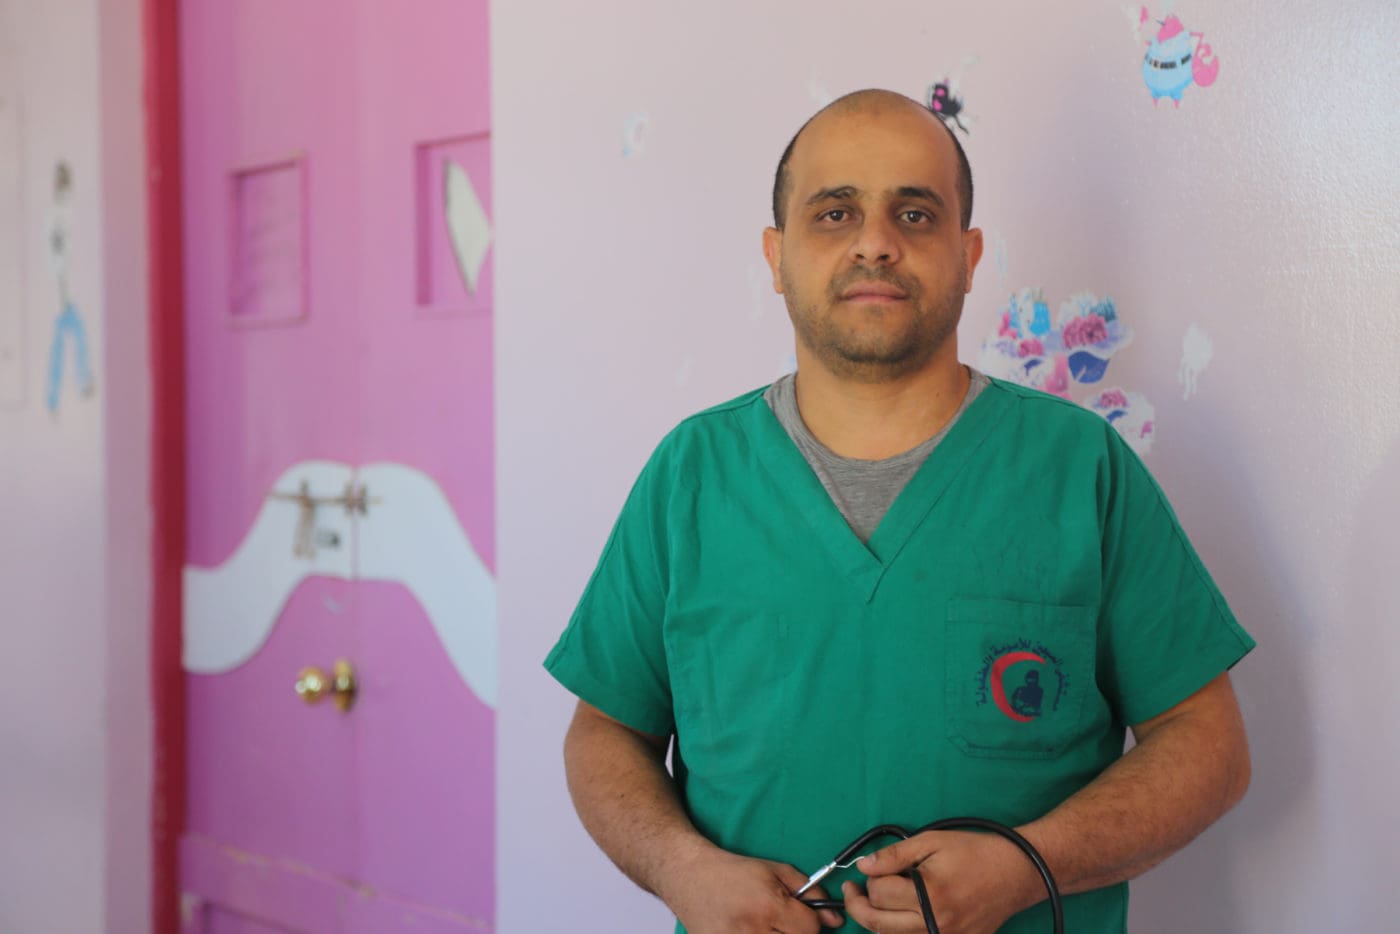 A nurse in green scrubs stands in front of a pink wall